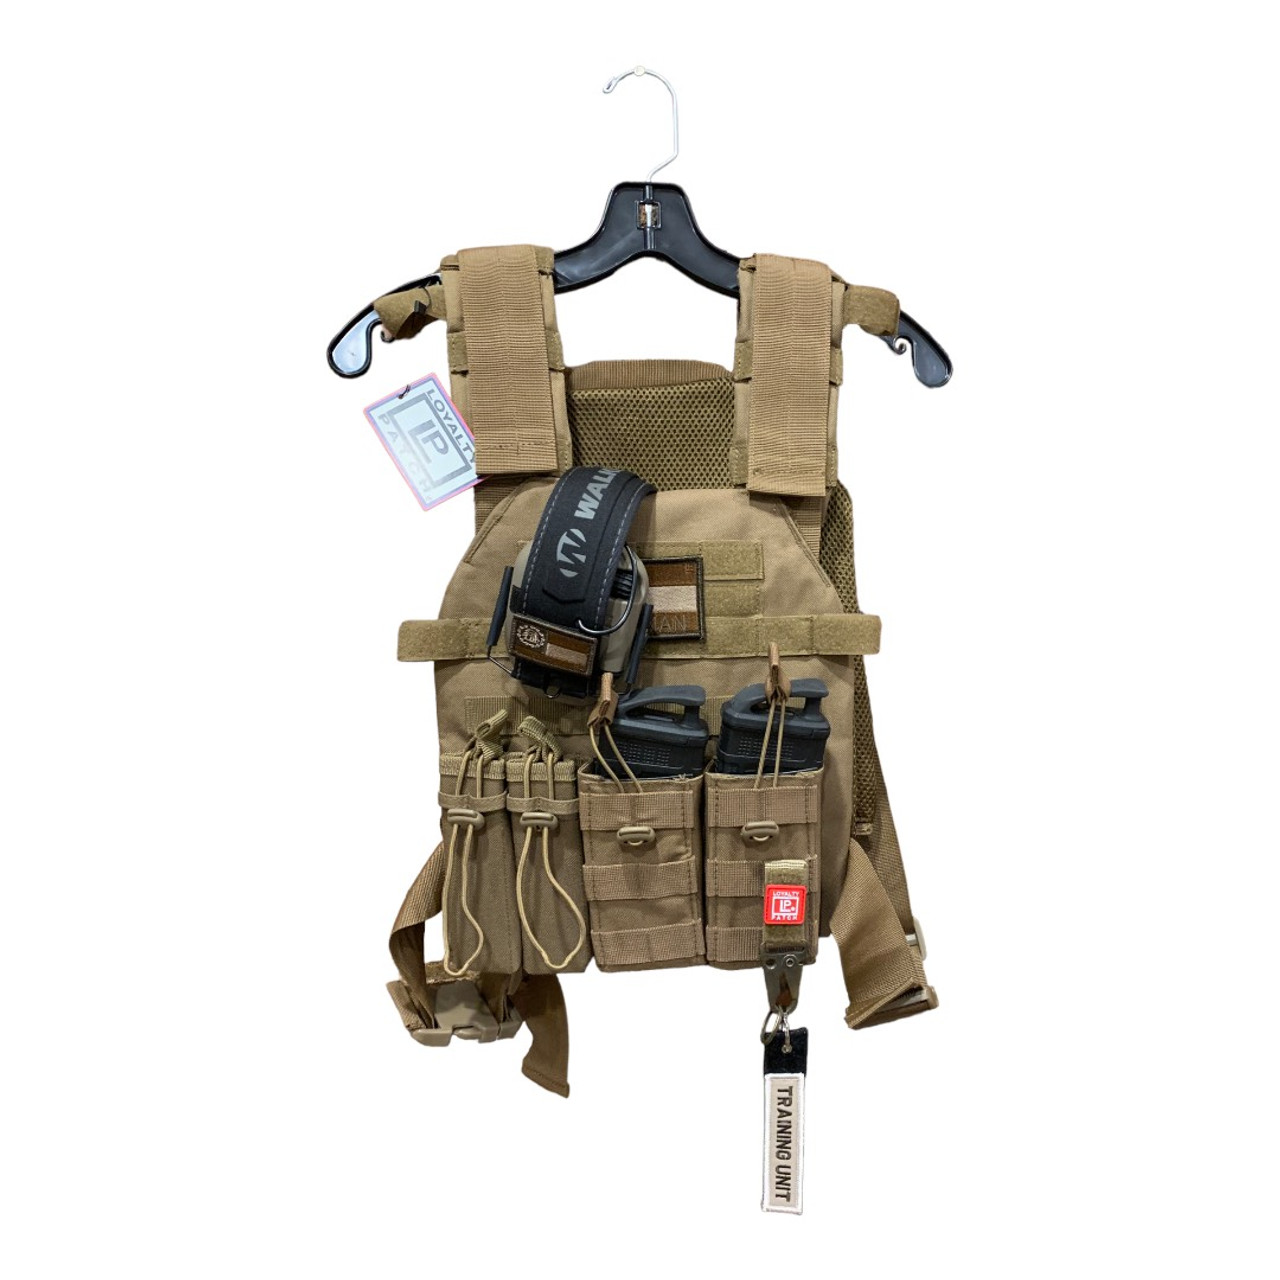 Tactical Weight / Plate Carrier - Black